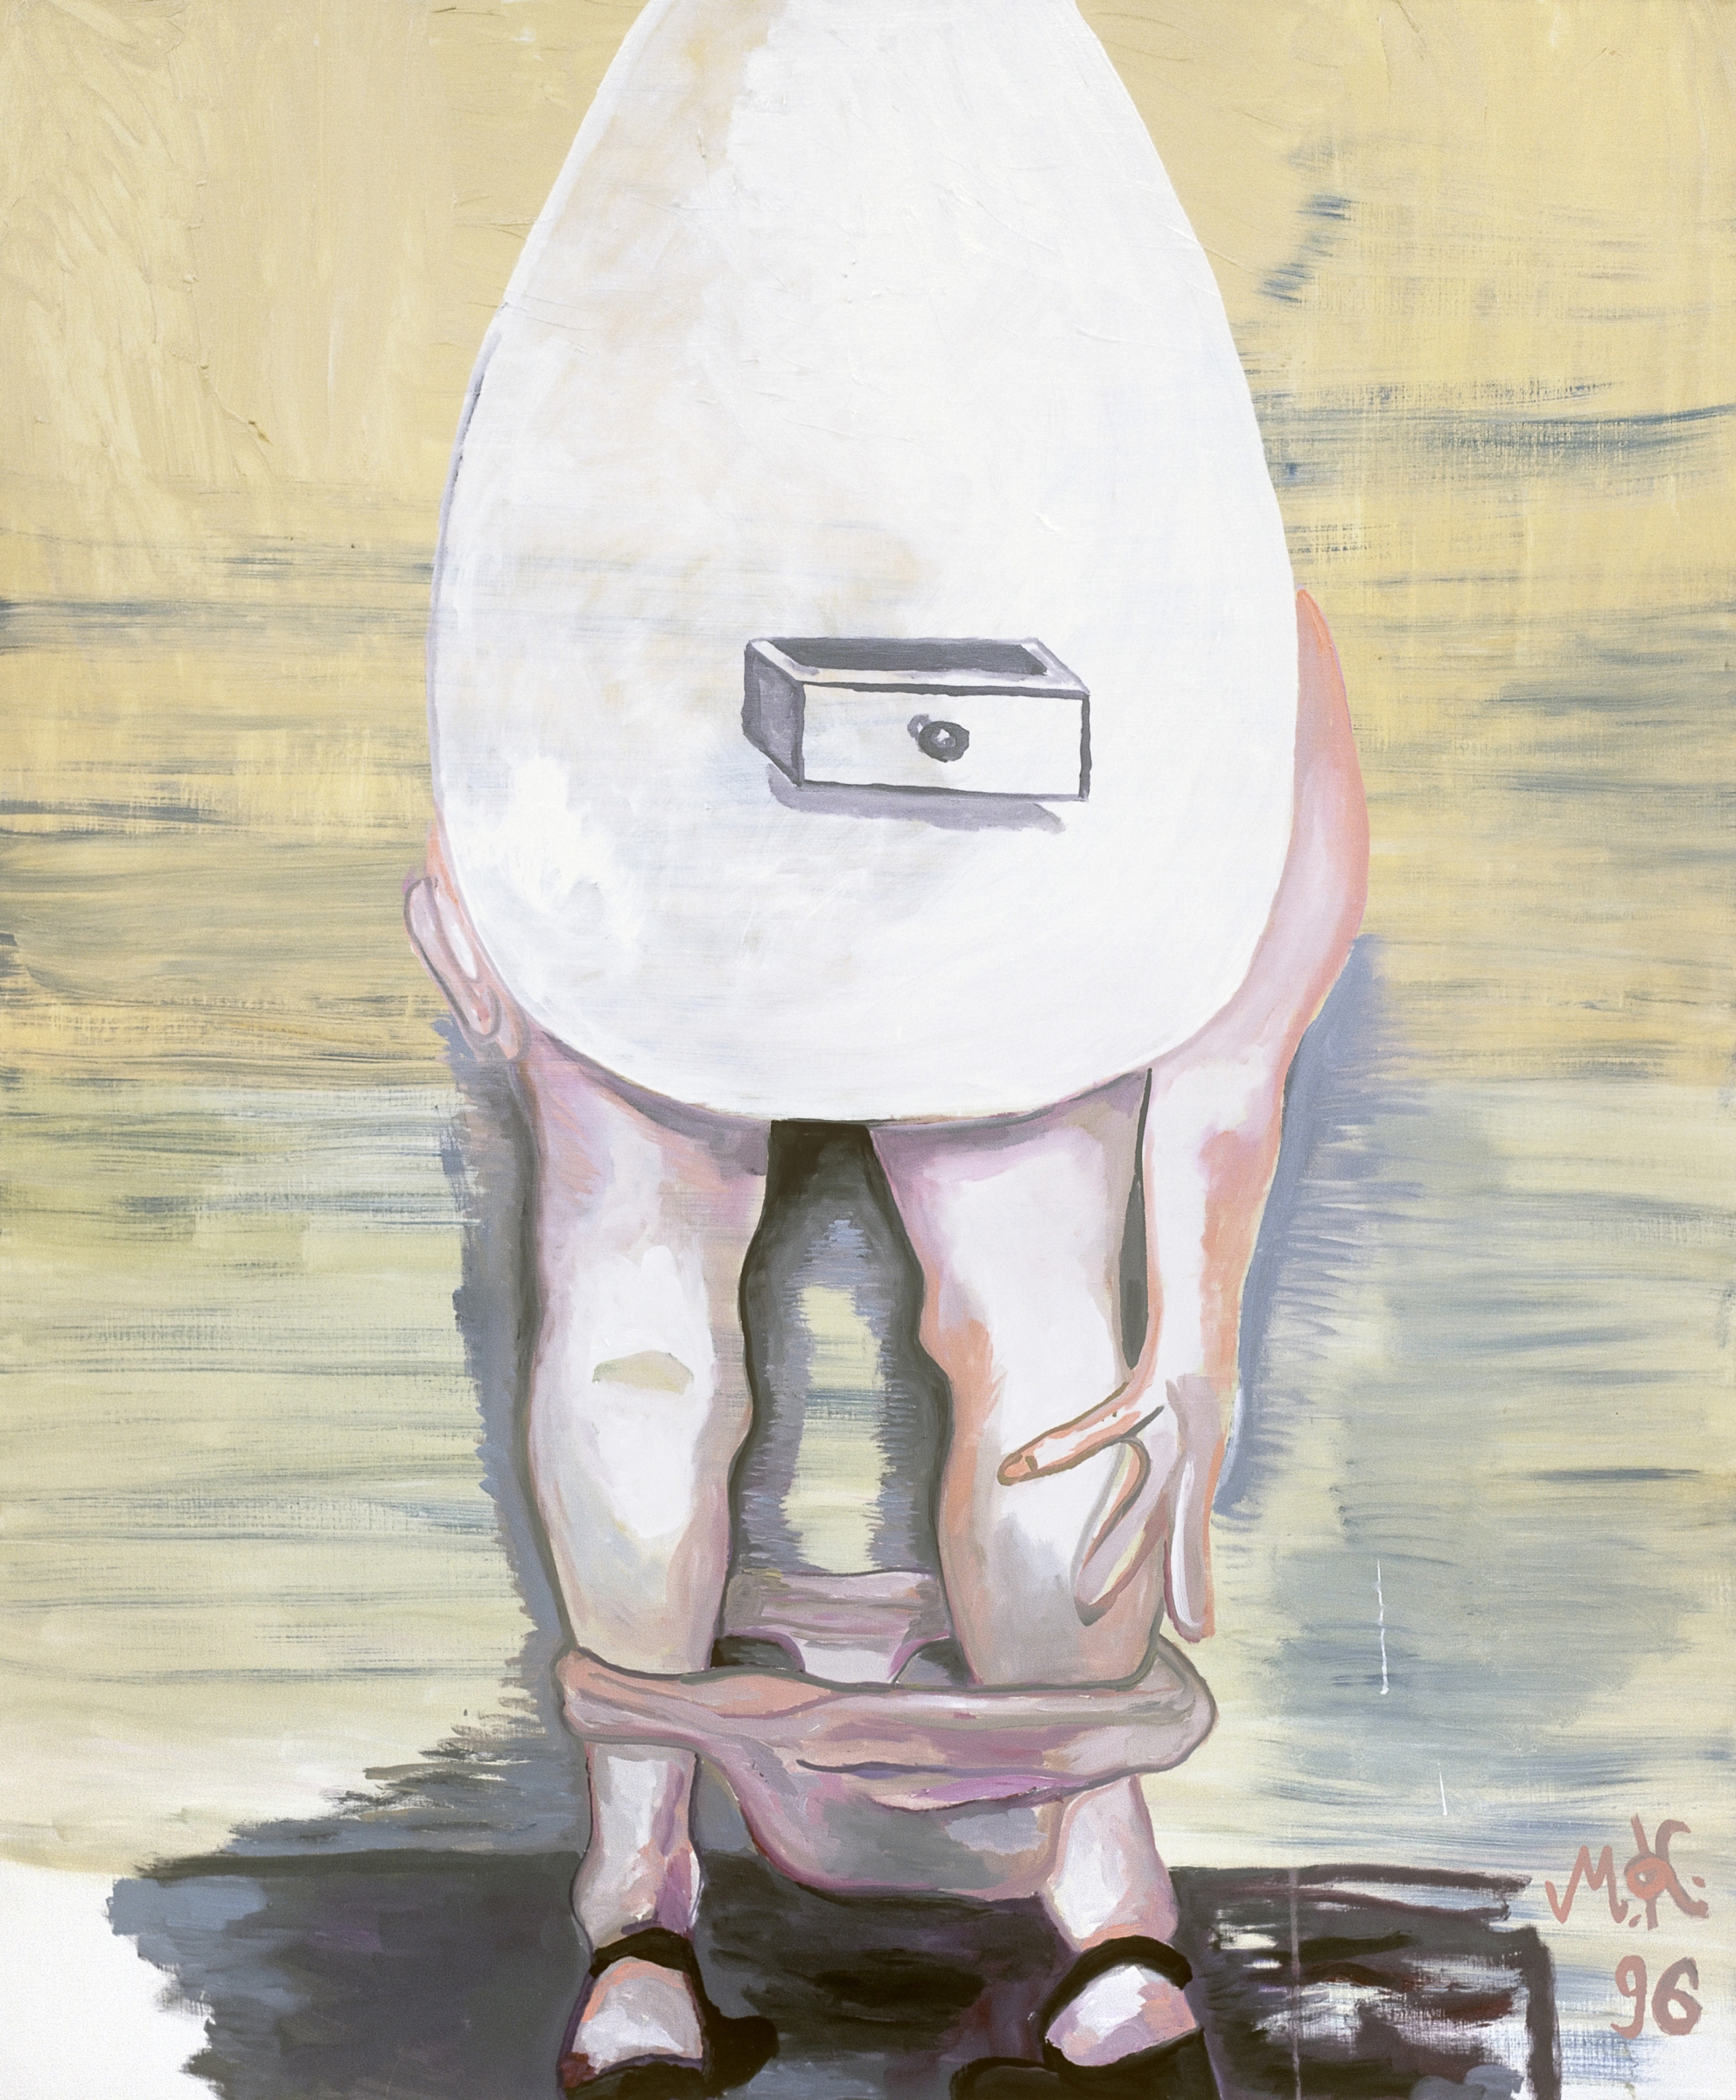 Martin Kippenberger
Egg Lady Who Can&amp;#39;t Be Pigeonholed, 1996
oil on canvas&amp;nbsp;
71 x 59 1/8 inches
(180 x 150 cm)
&amp;copy; Estate of Martin Kippenberger, Galerie Gisela Capitain, Cologne